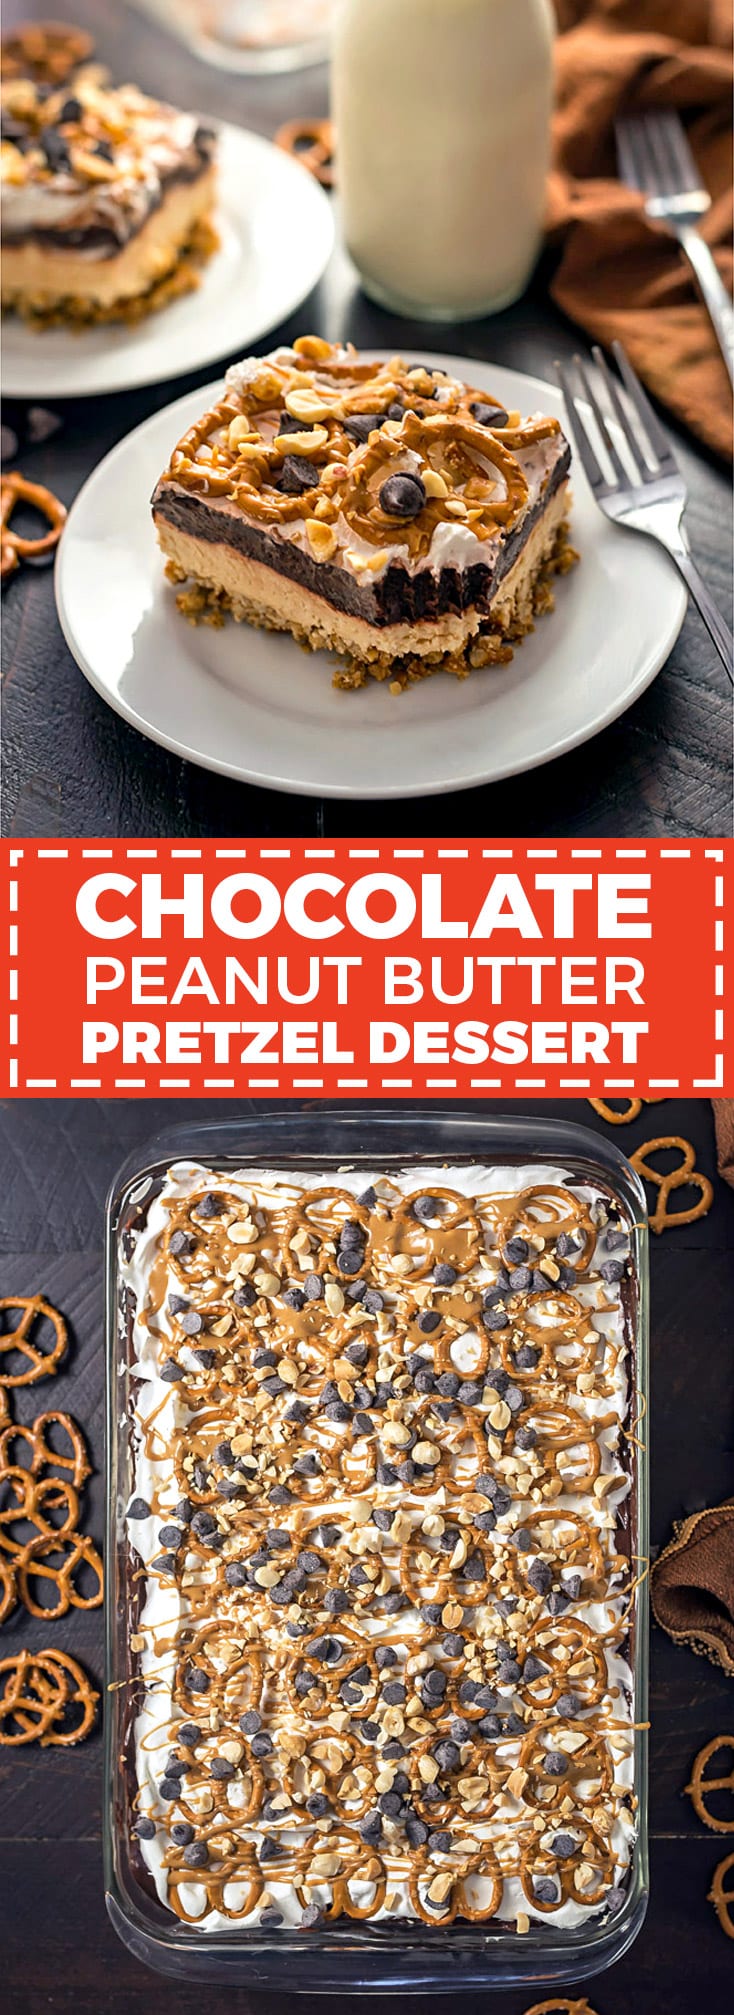 Chocolate Peanut Butter Pretzel Dessert. This easy to make, creamy, chocolatey, sweet-and-salty dessert is exactly what you need to serve a crowd. | hostthetoast.com